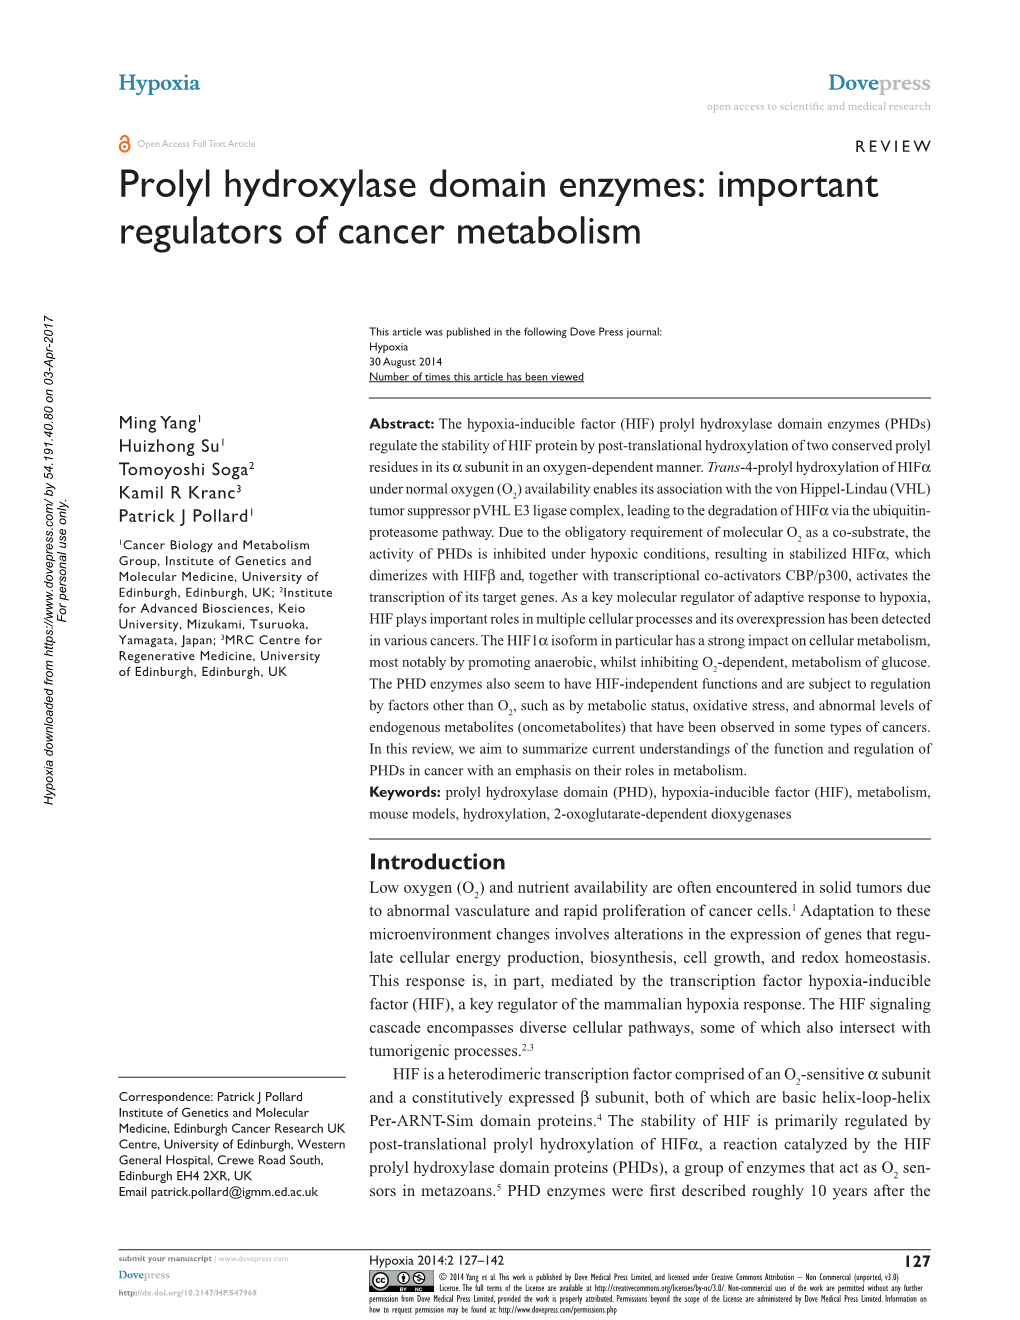 Prolyl Hydroxylase Domain Enzymes: Important Regulators of Cancer Metabolism